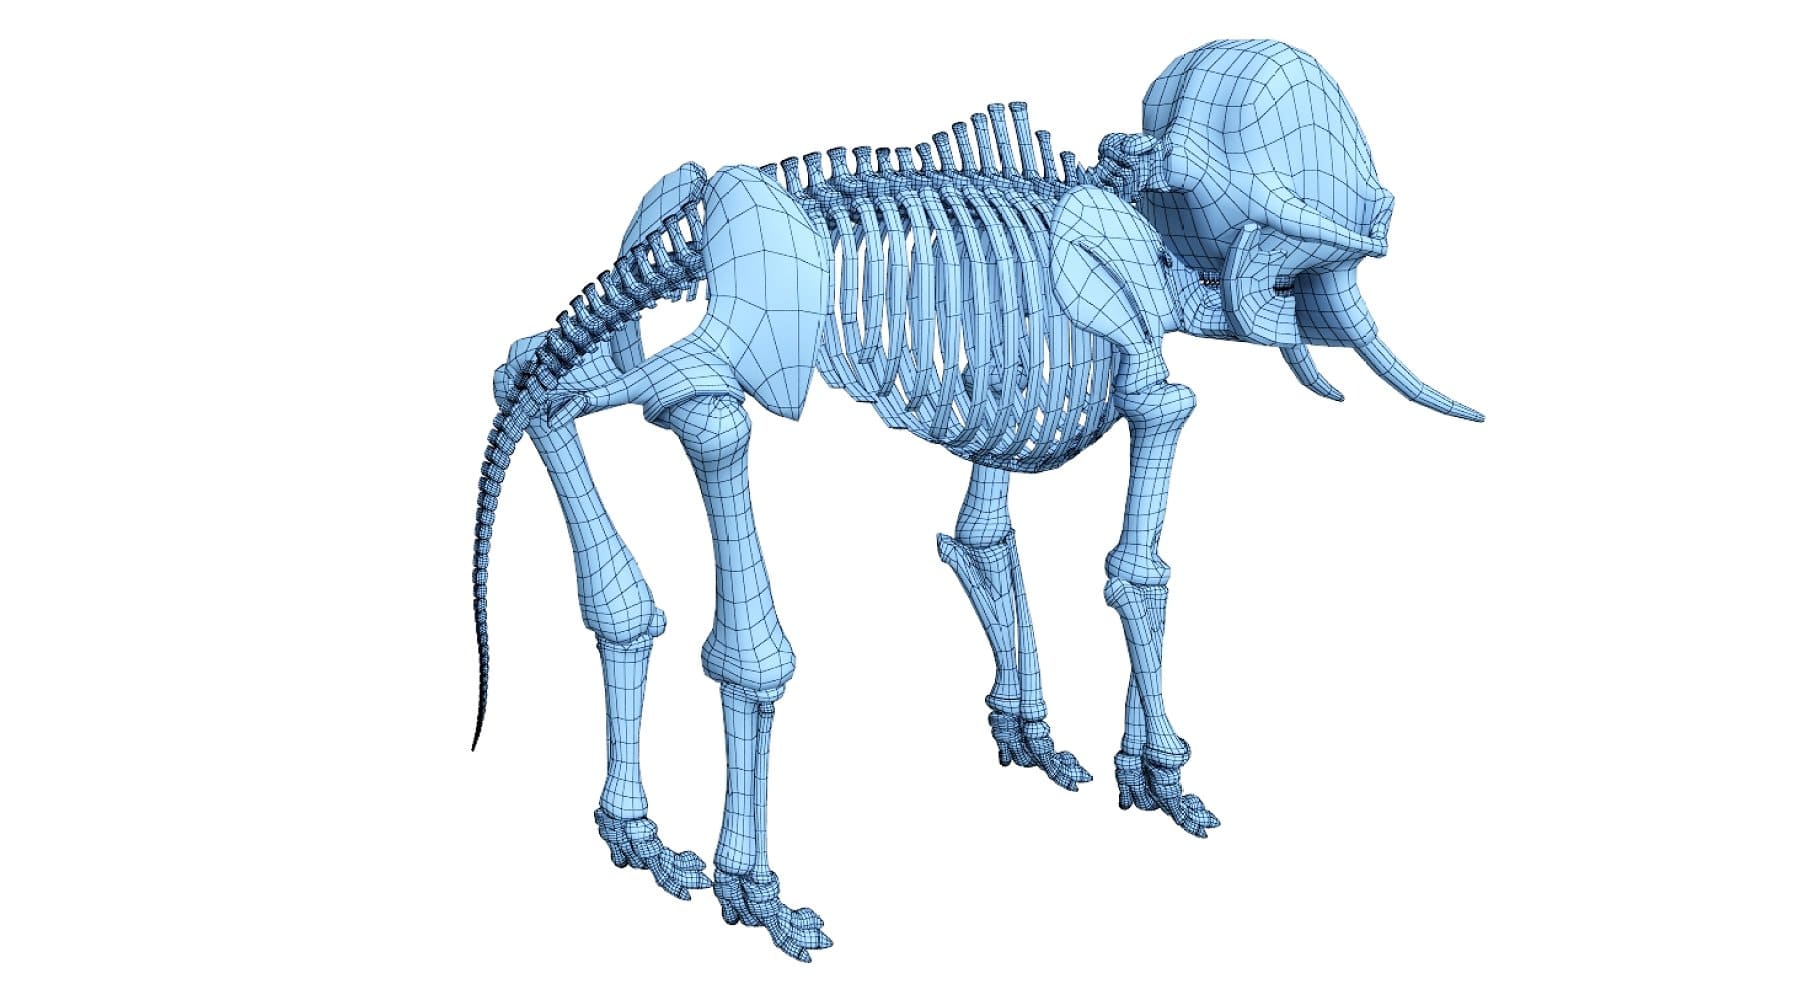 Image of a 3D model of the back of an elephant in blue.